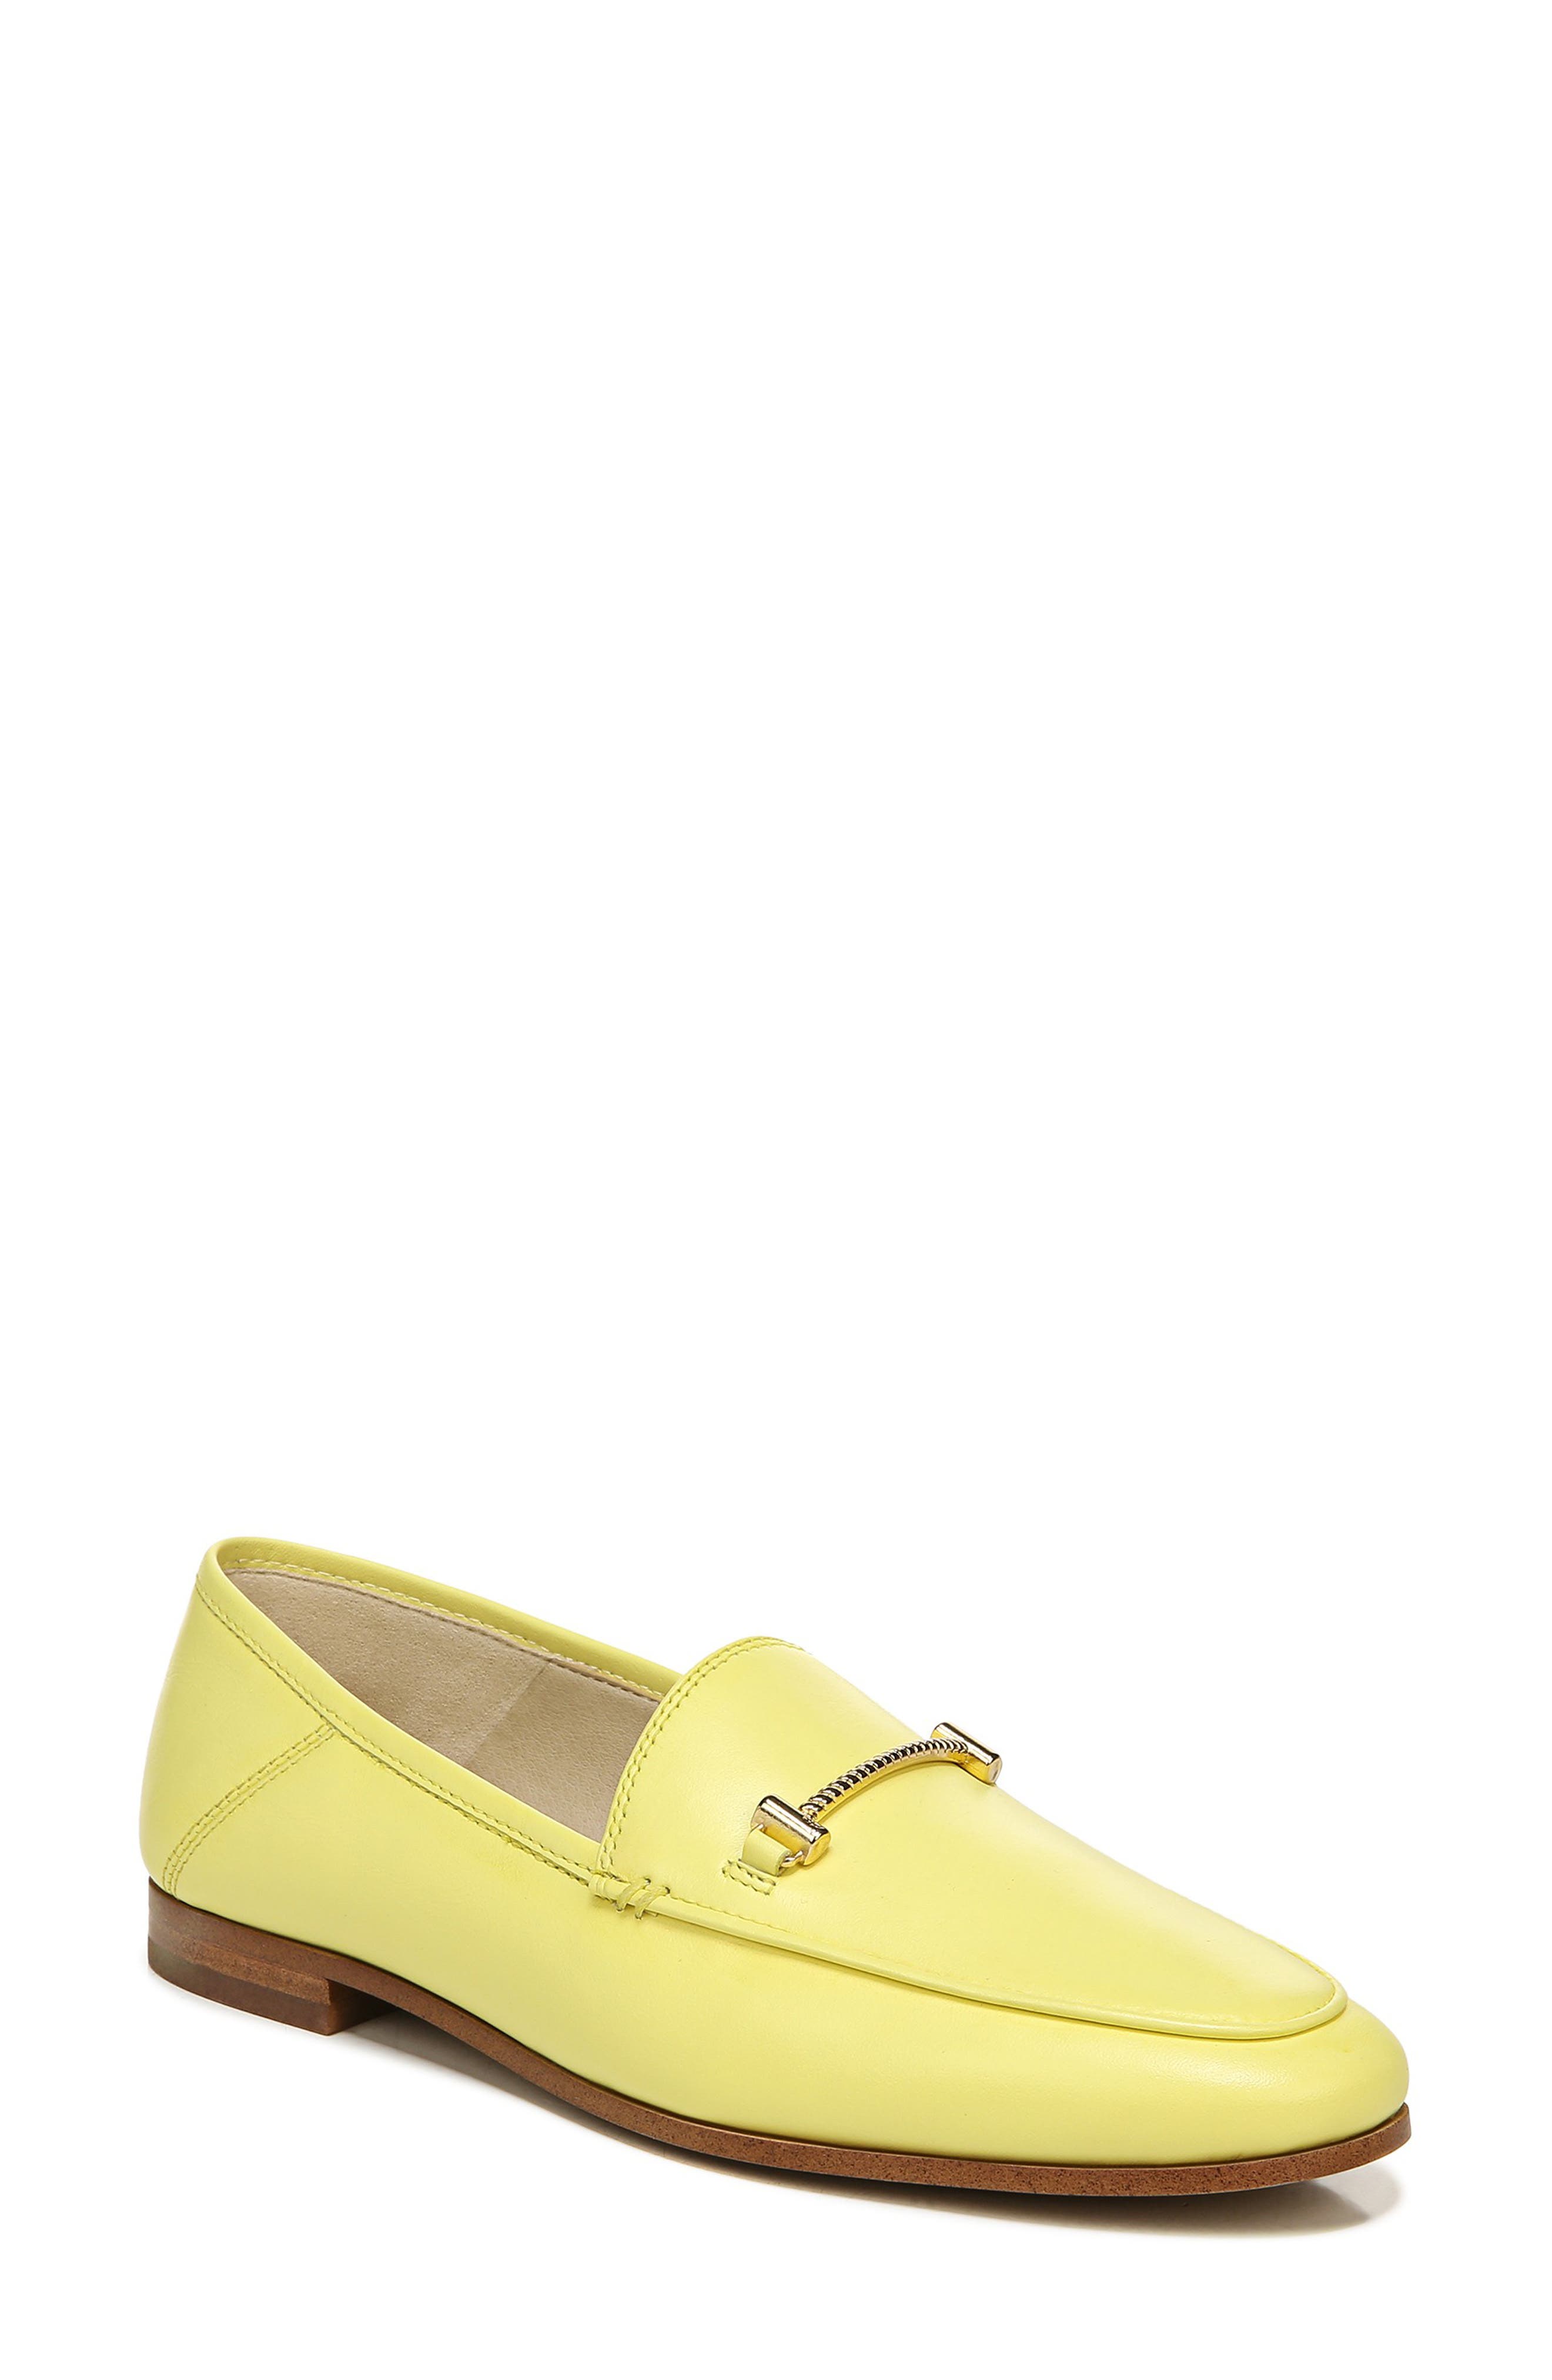 yellow flats with strap